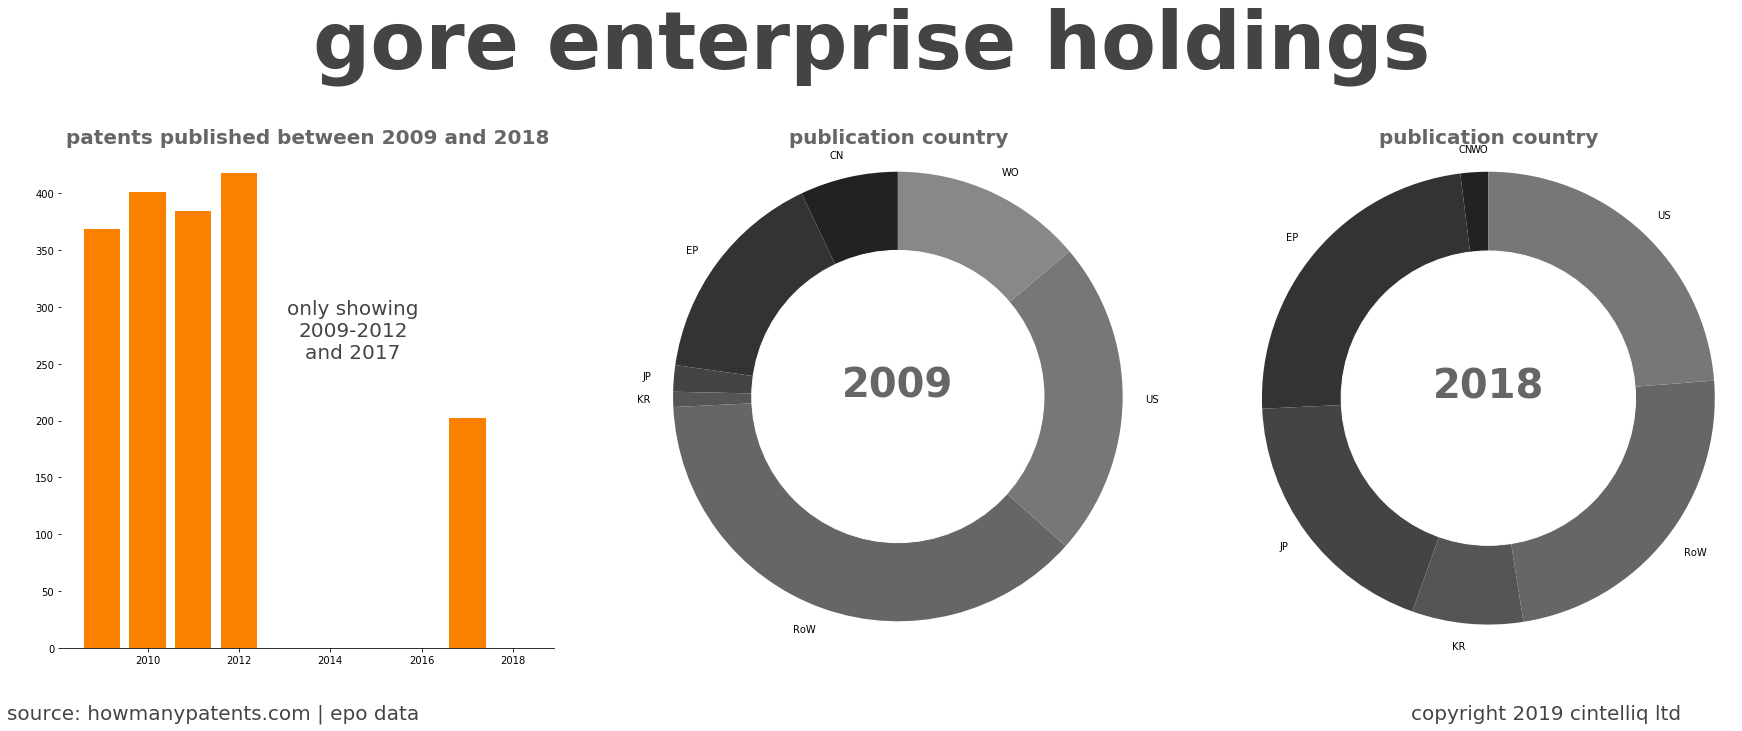 summary of patents for Gore Enterprise Holdings